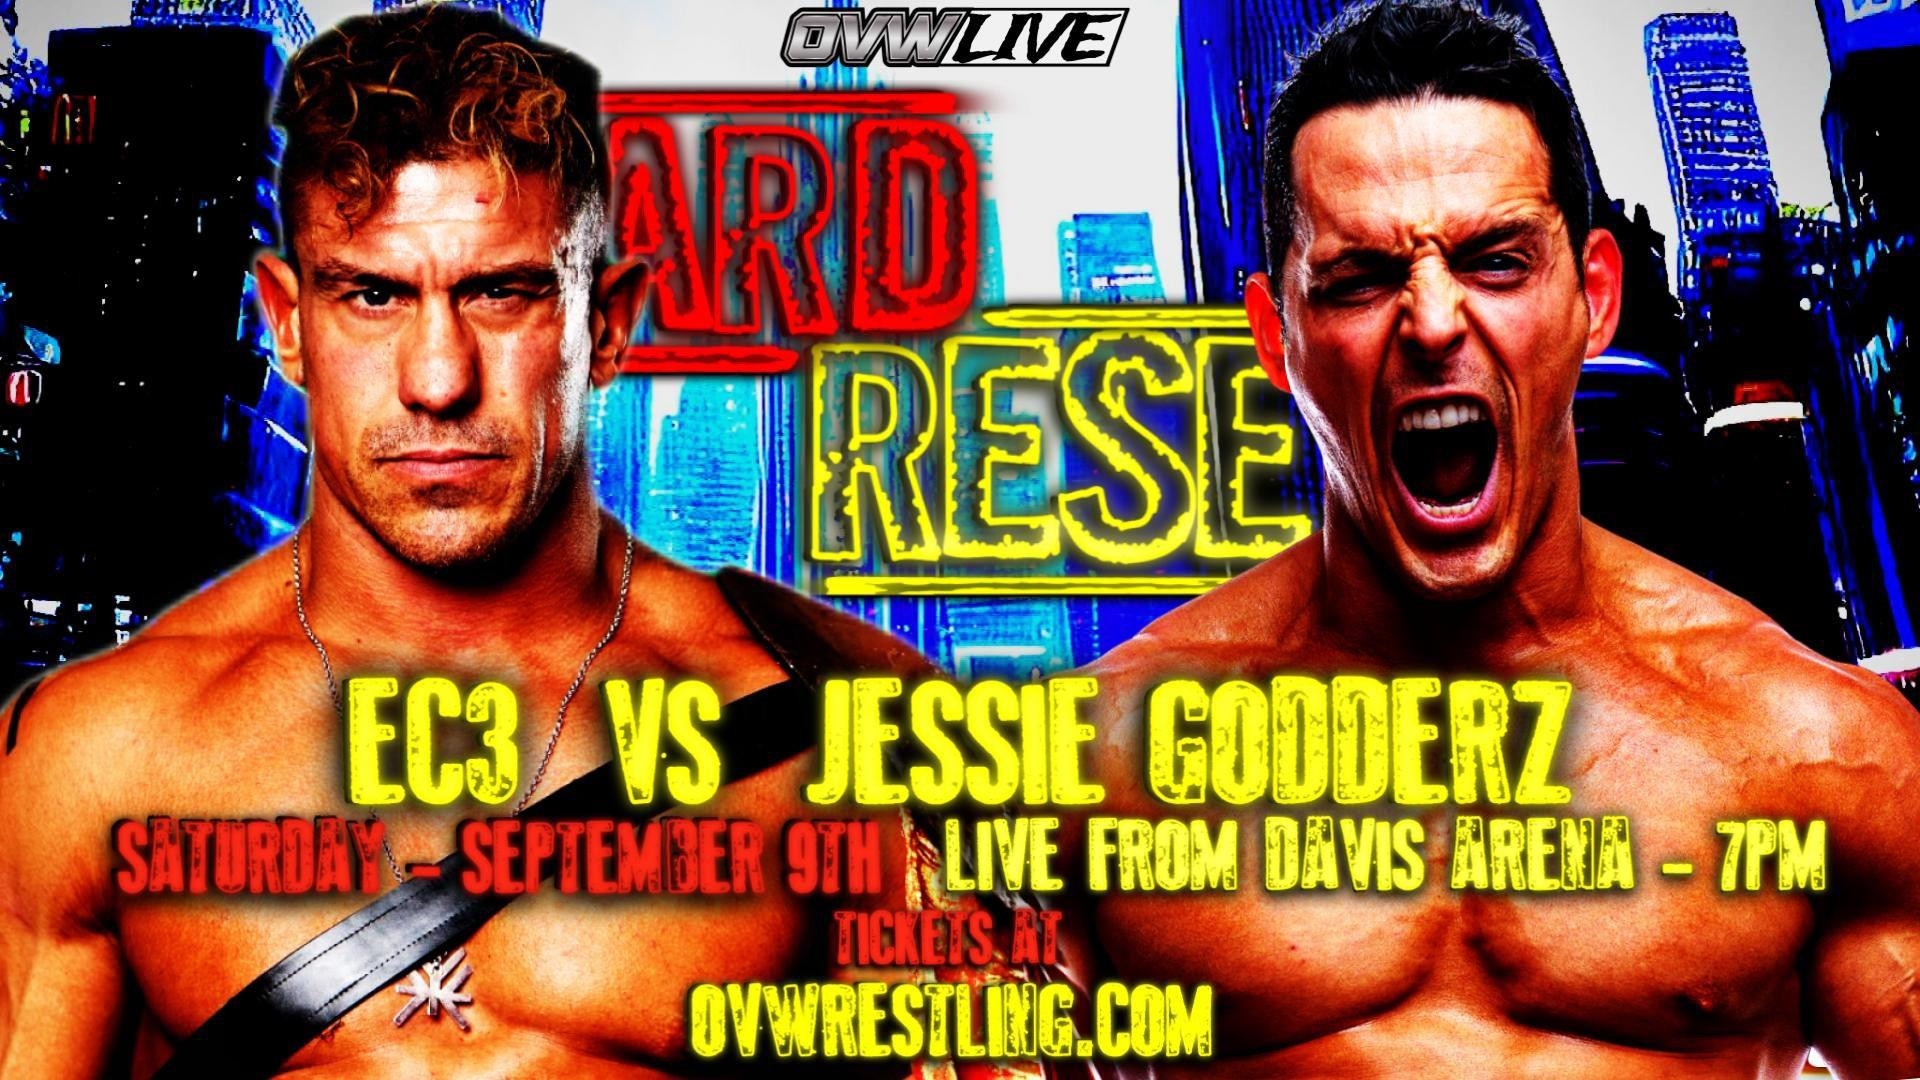 OVW Saturday Night Special Hard Reset Results (9/9) EC3 Faces Jessie